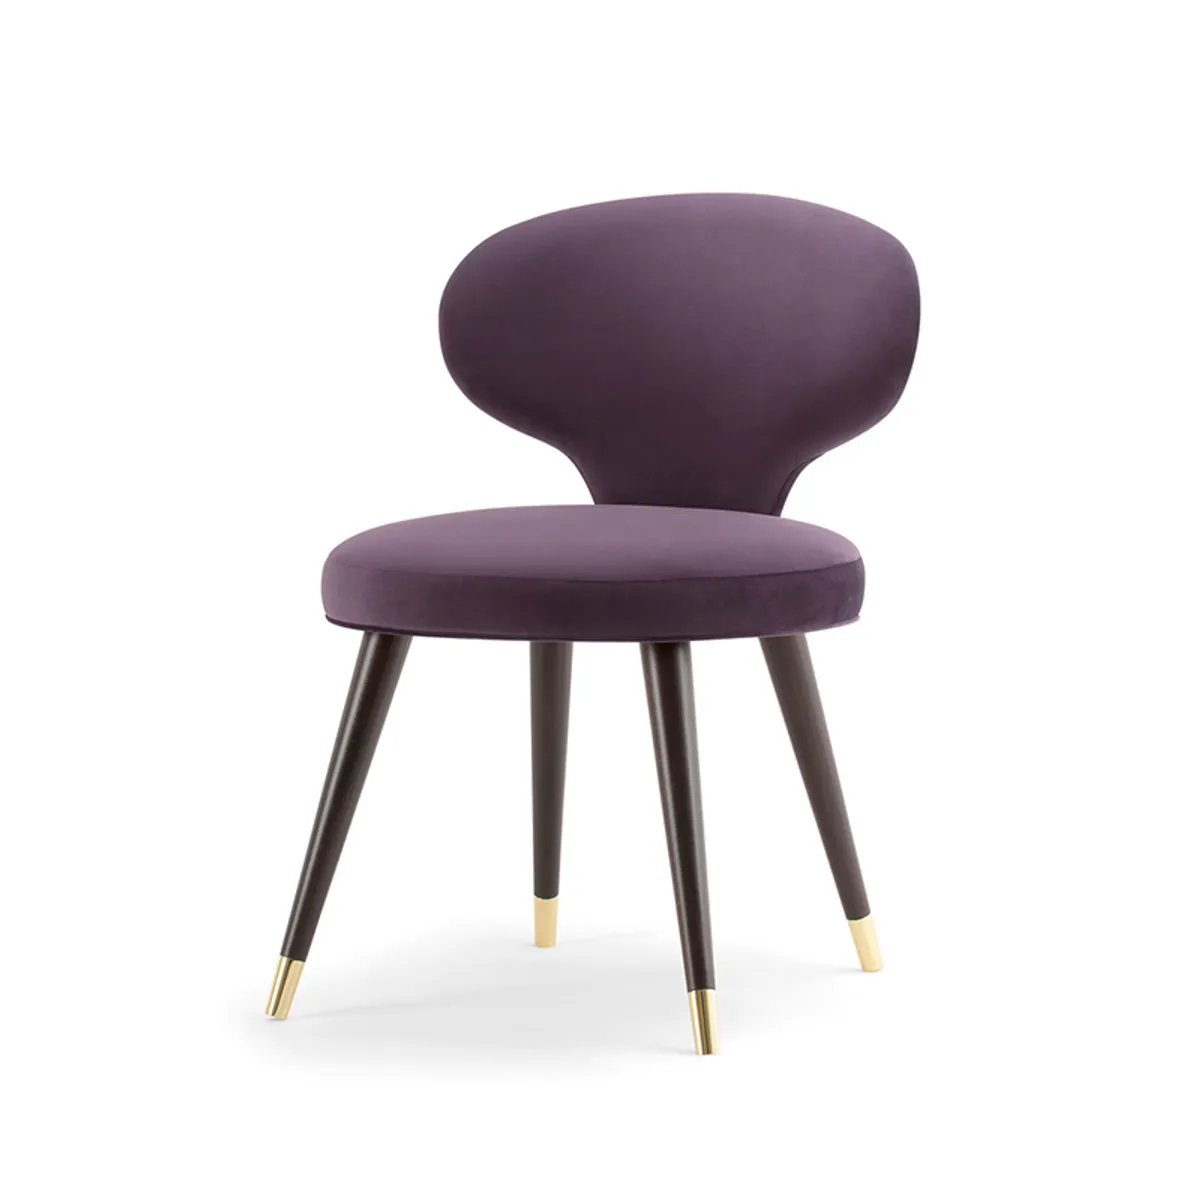 Sylvia Side Chair Purple Upholstery And Wooden Legs Hotel Furniture By Insideoutcontracts